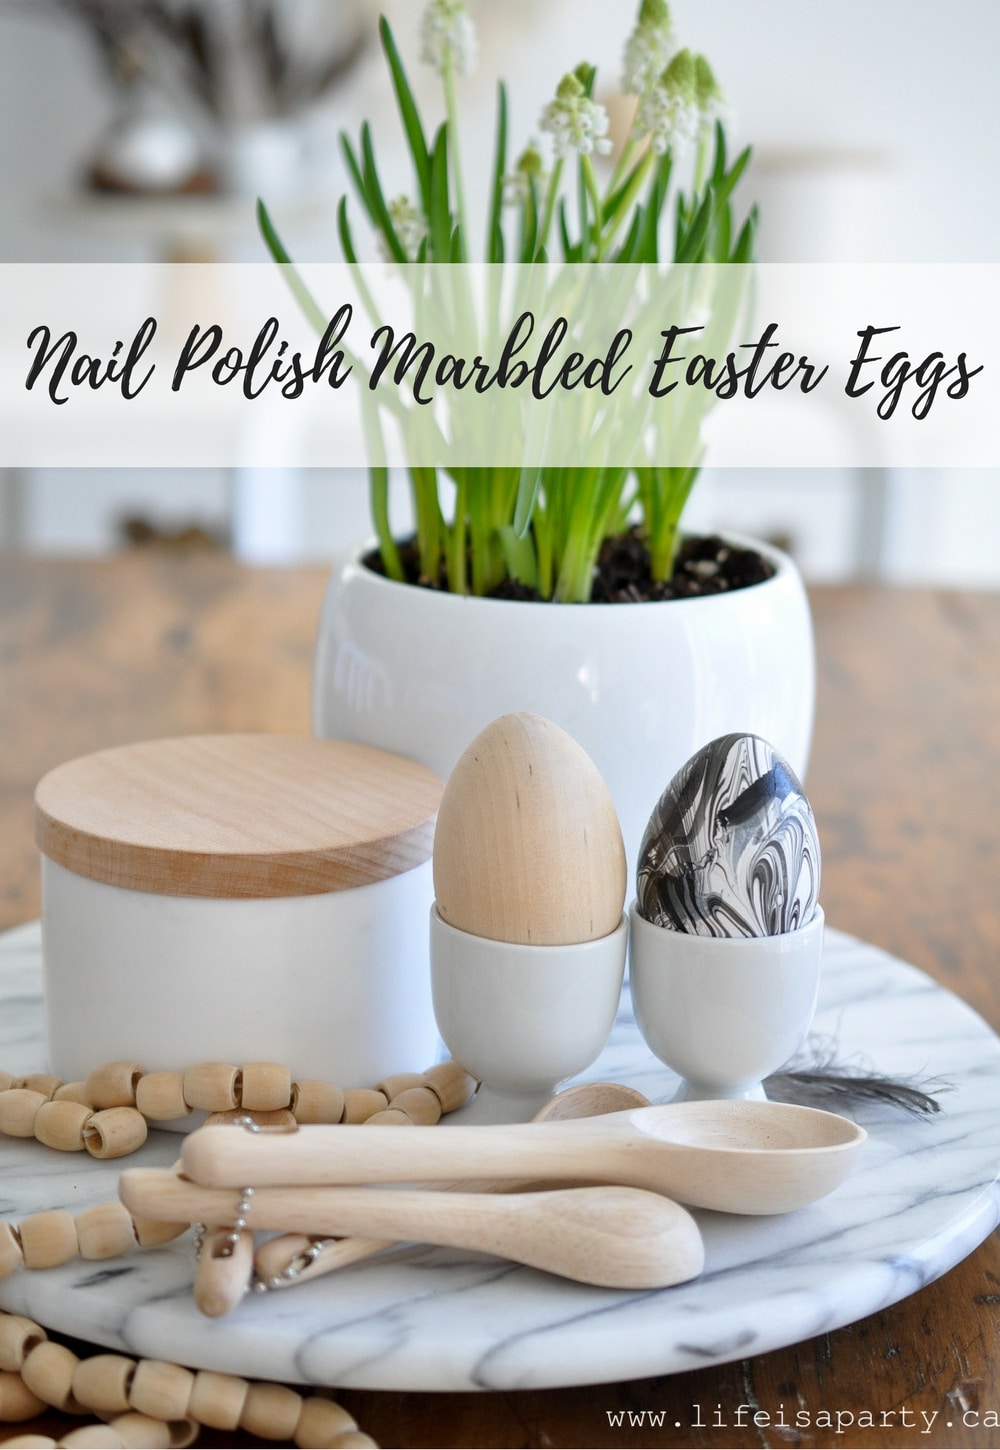 Nail Polish Marbled Easter Eggs: easy water marbling with nail polish is the perfect modern touch to your Easter eggs.